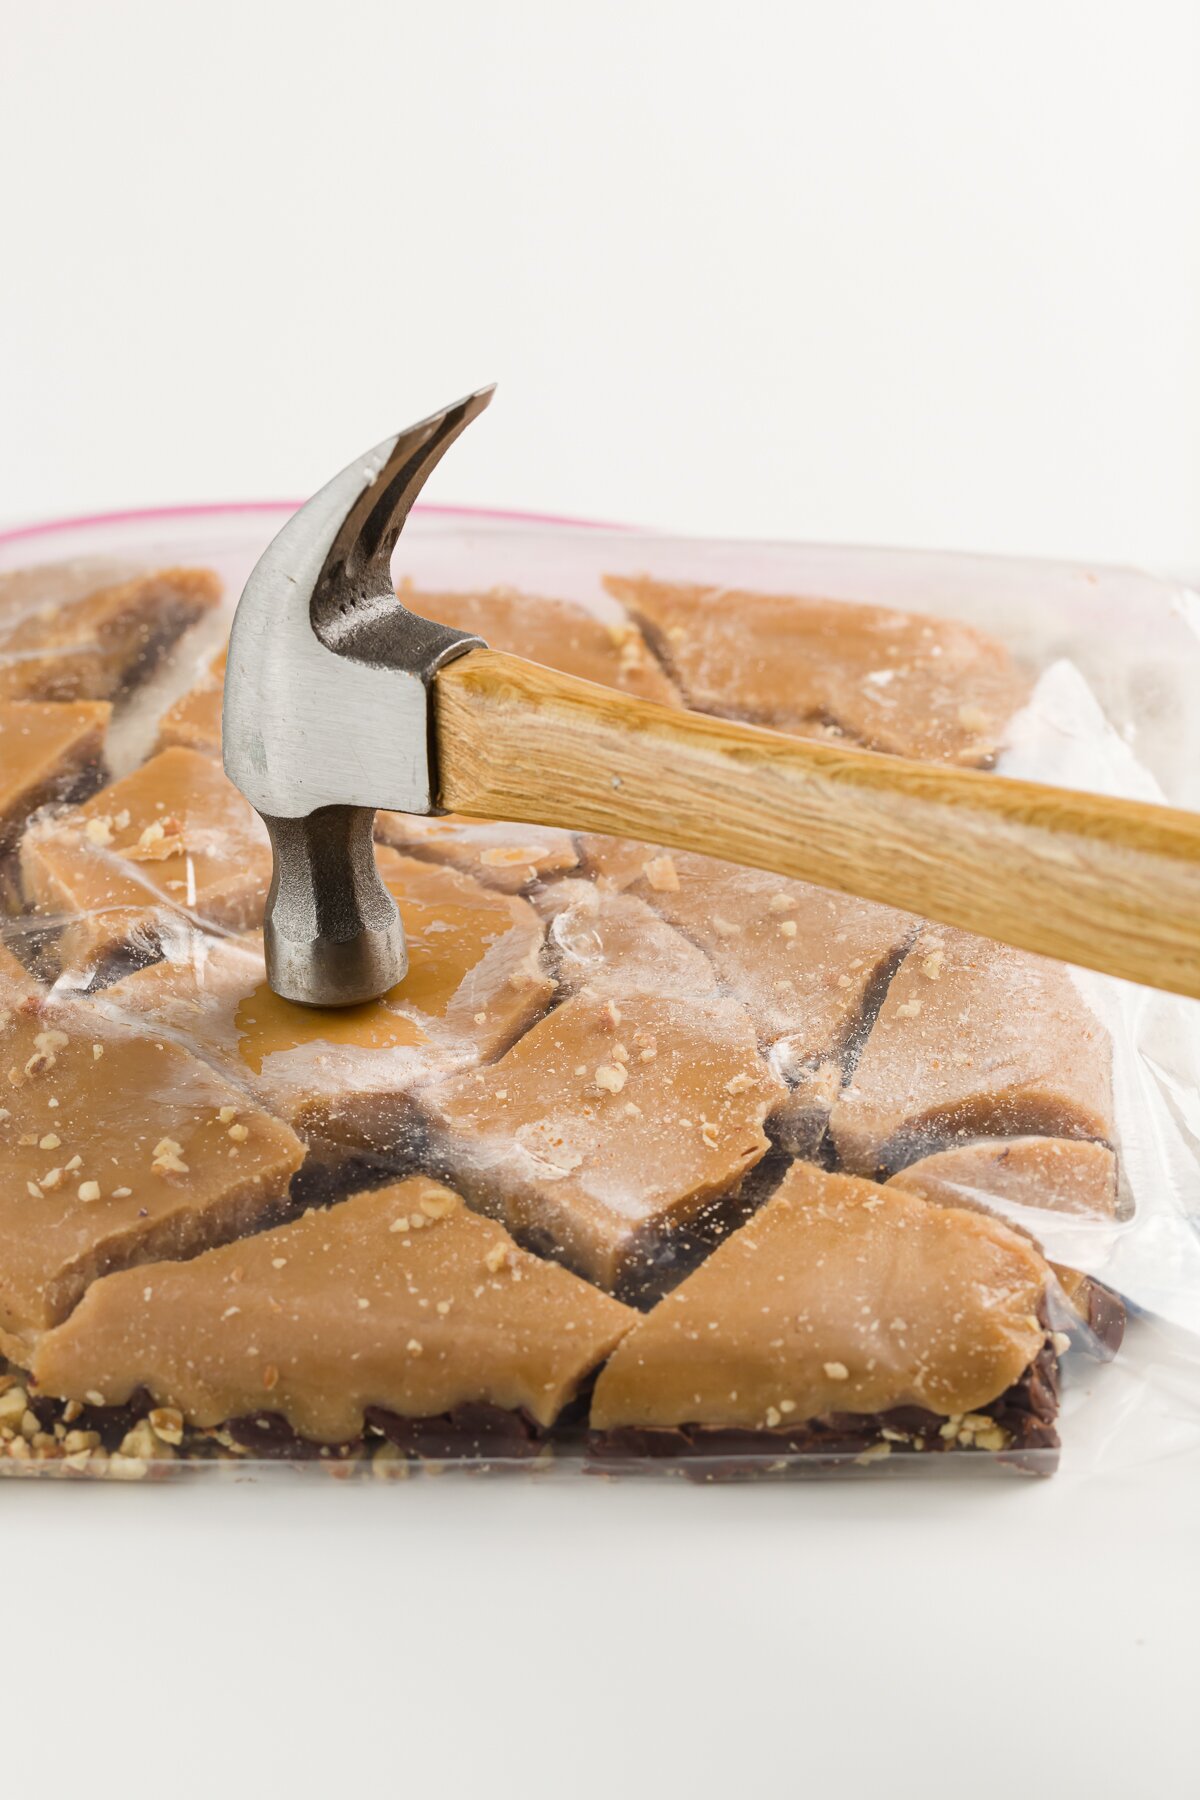 Upside-dwon ziplock bag of toffee broken into pieces being hit with a hammer